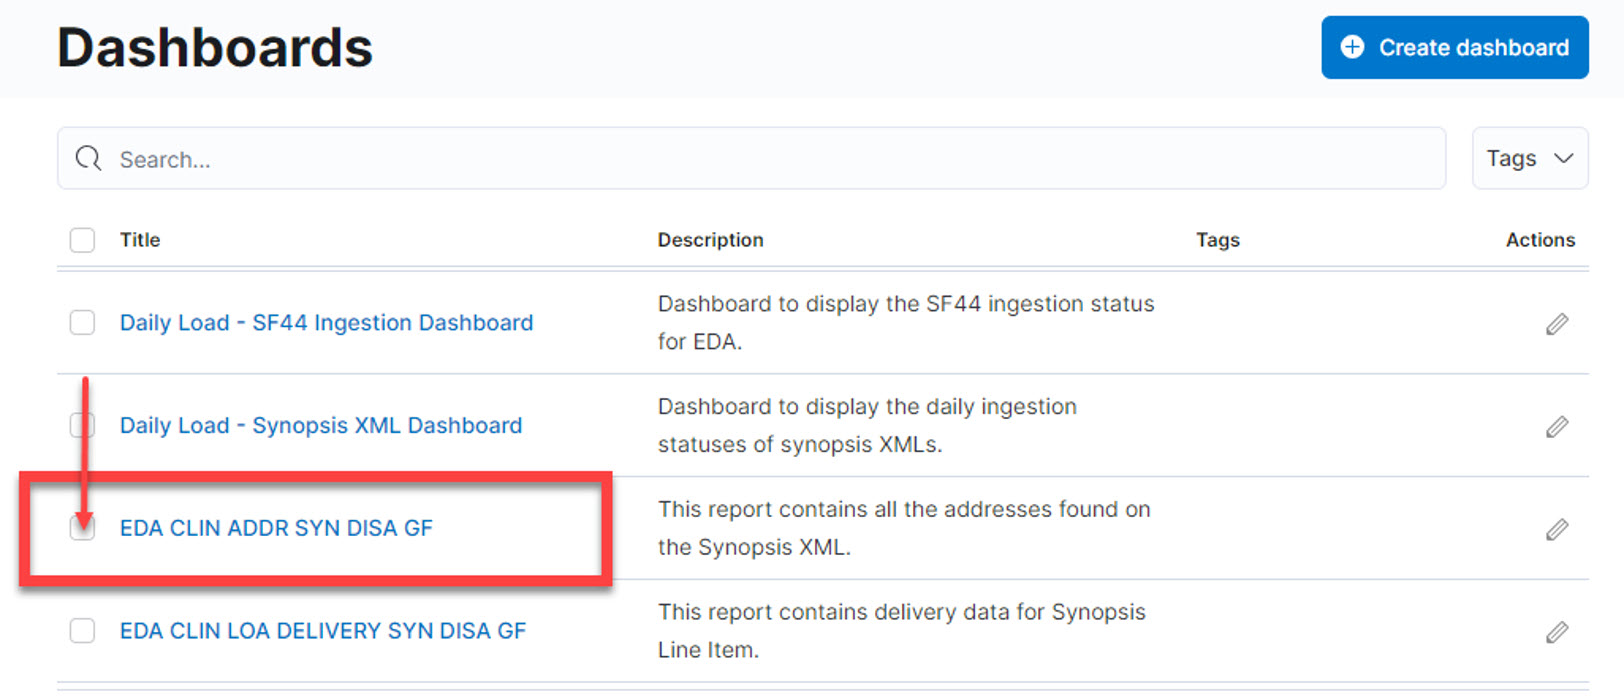 The image provides a preview of the EDA CLIN ADDR SYN DISA GF Date Fields Overview.